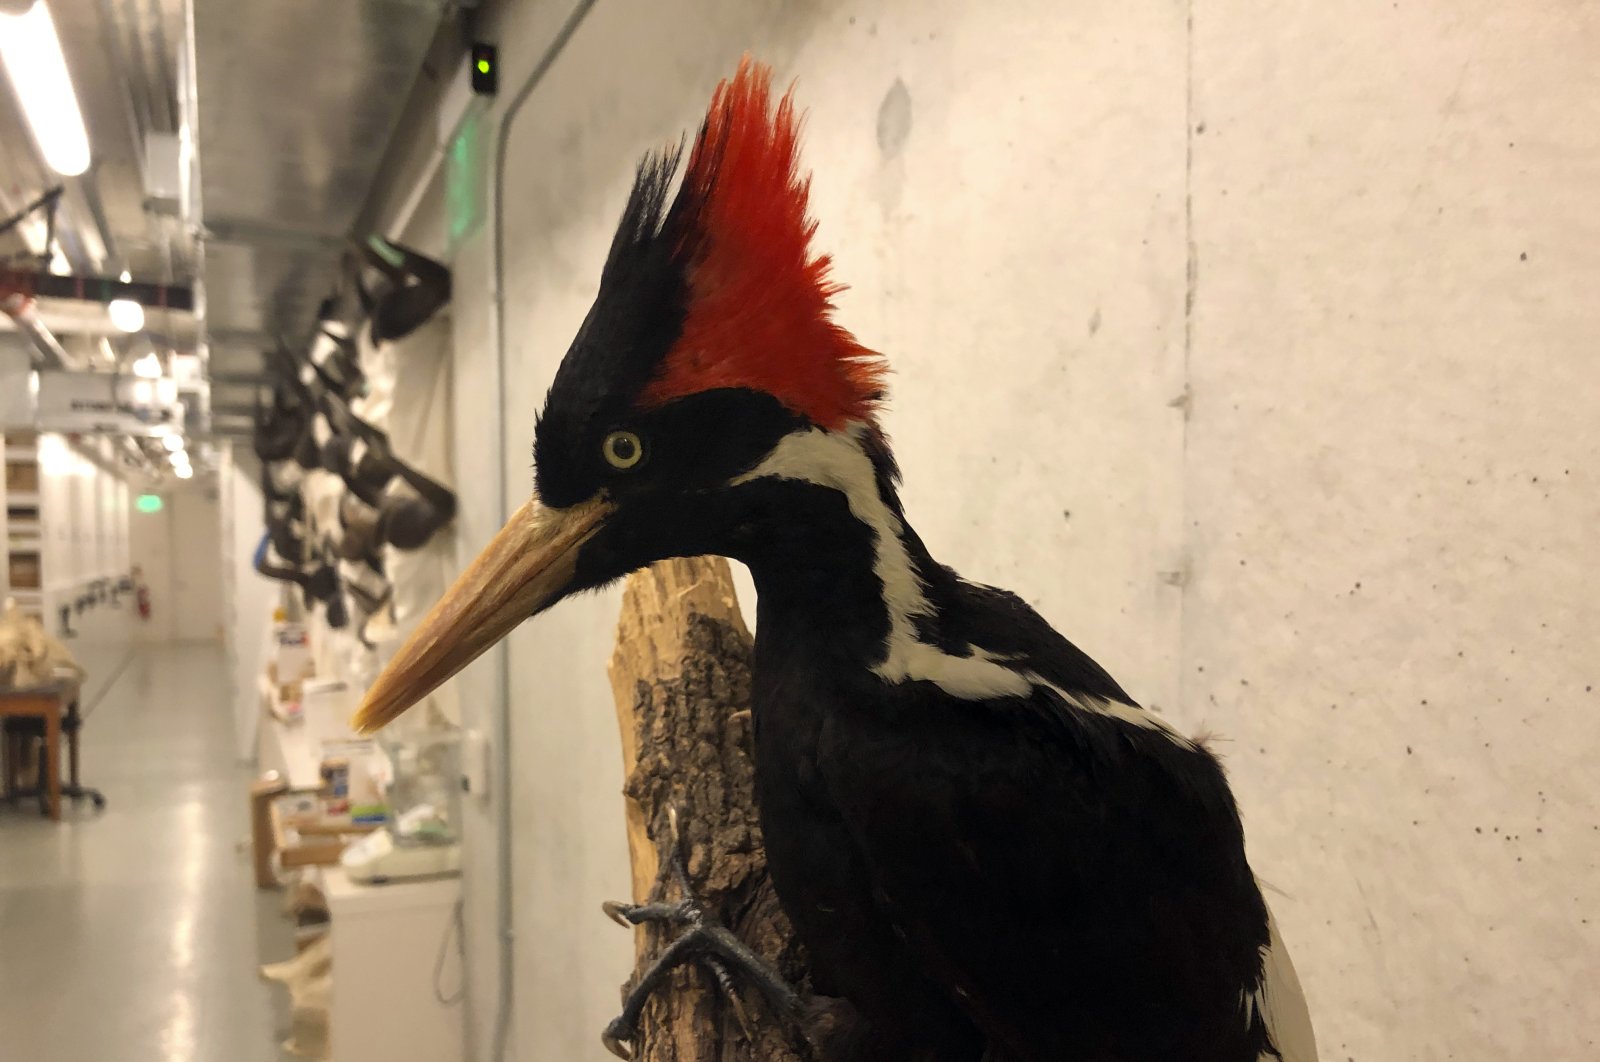 An ivory-billed woodpecker specimen is on a display at the California Academy of Sciences in San Francisco, U.S., Sept. 24, 2021. (AP Photo)